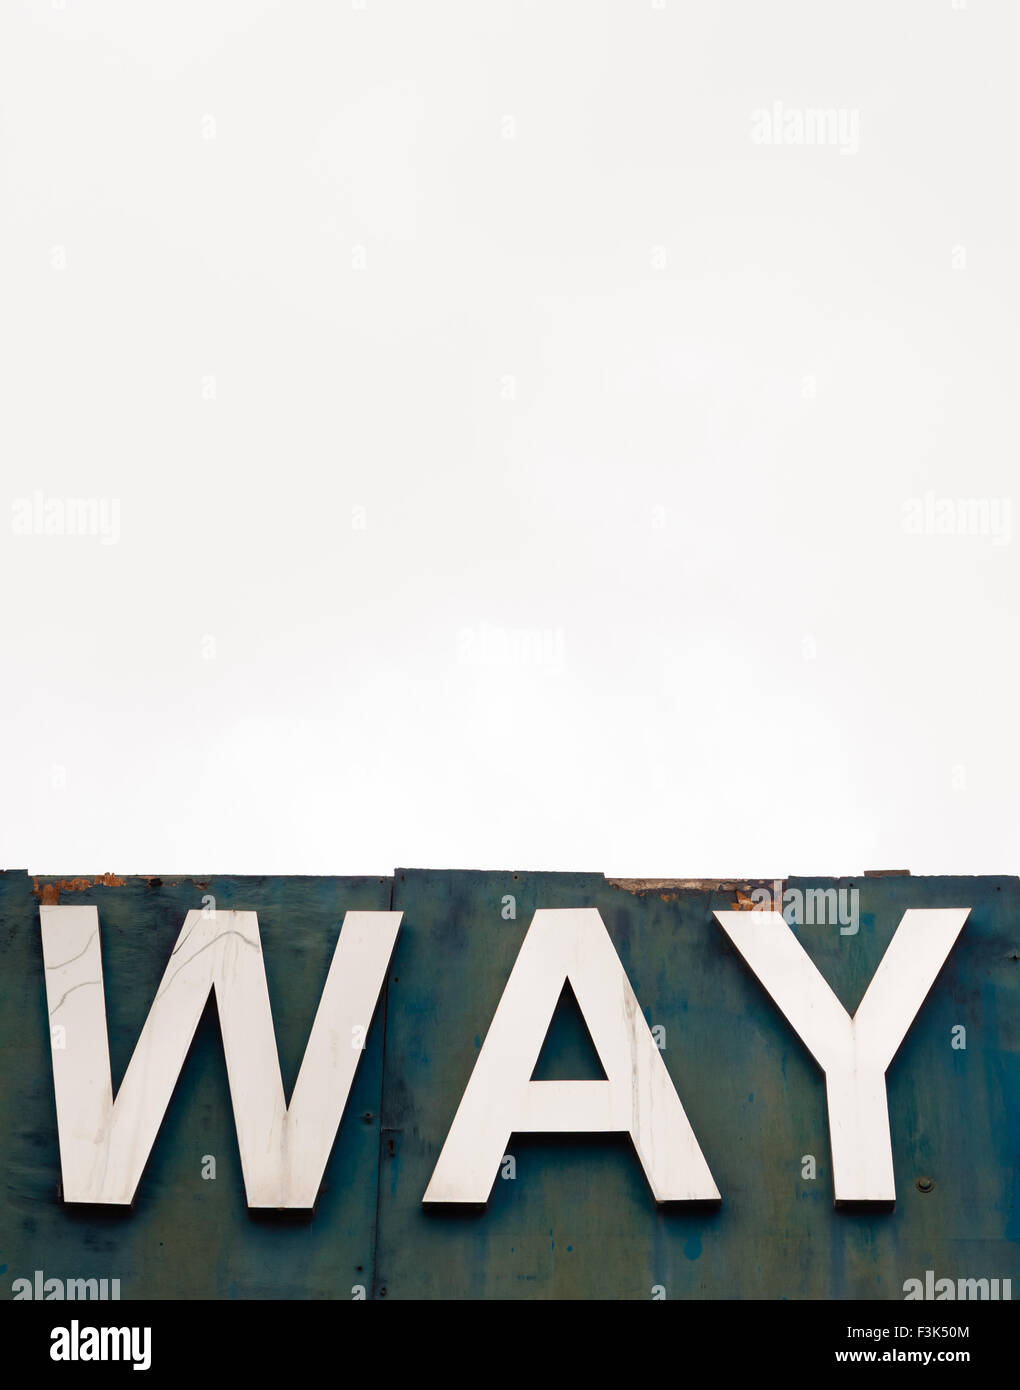 An old wooden signboard pictured against an overcast sky. The sign says 'WAY'. Stock Photo